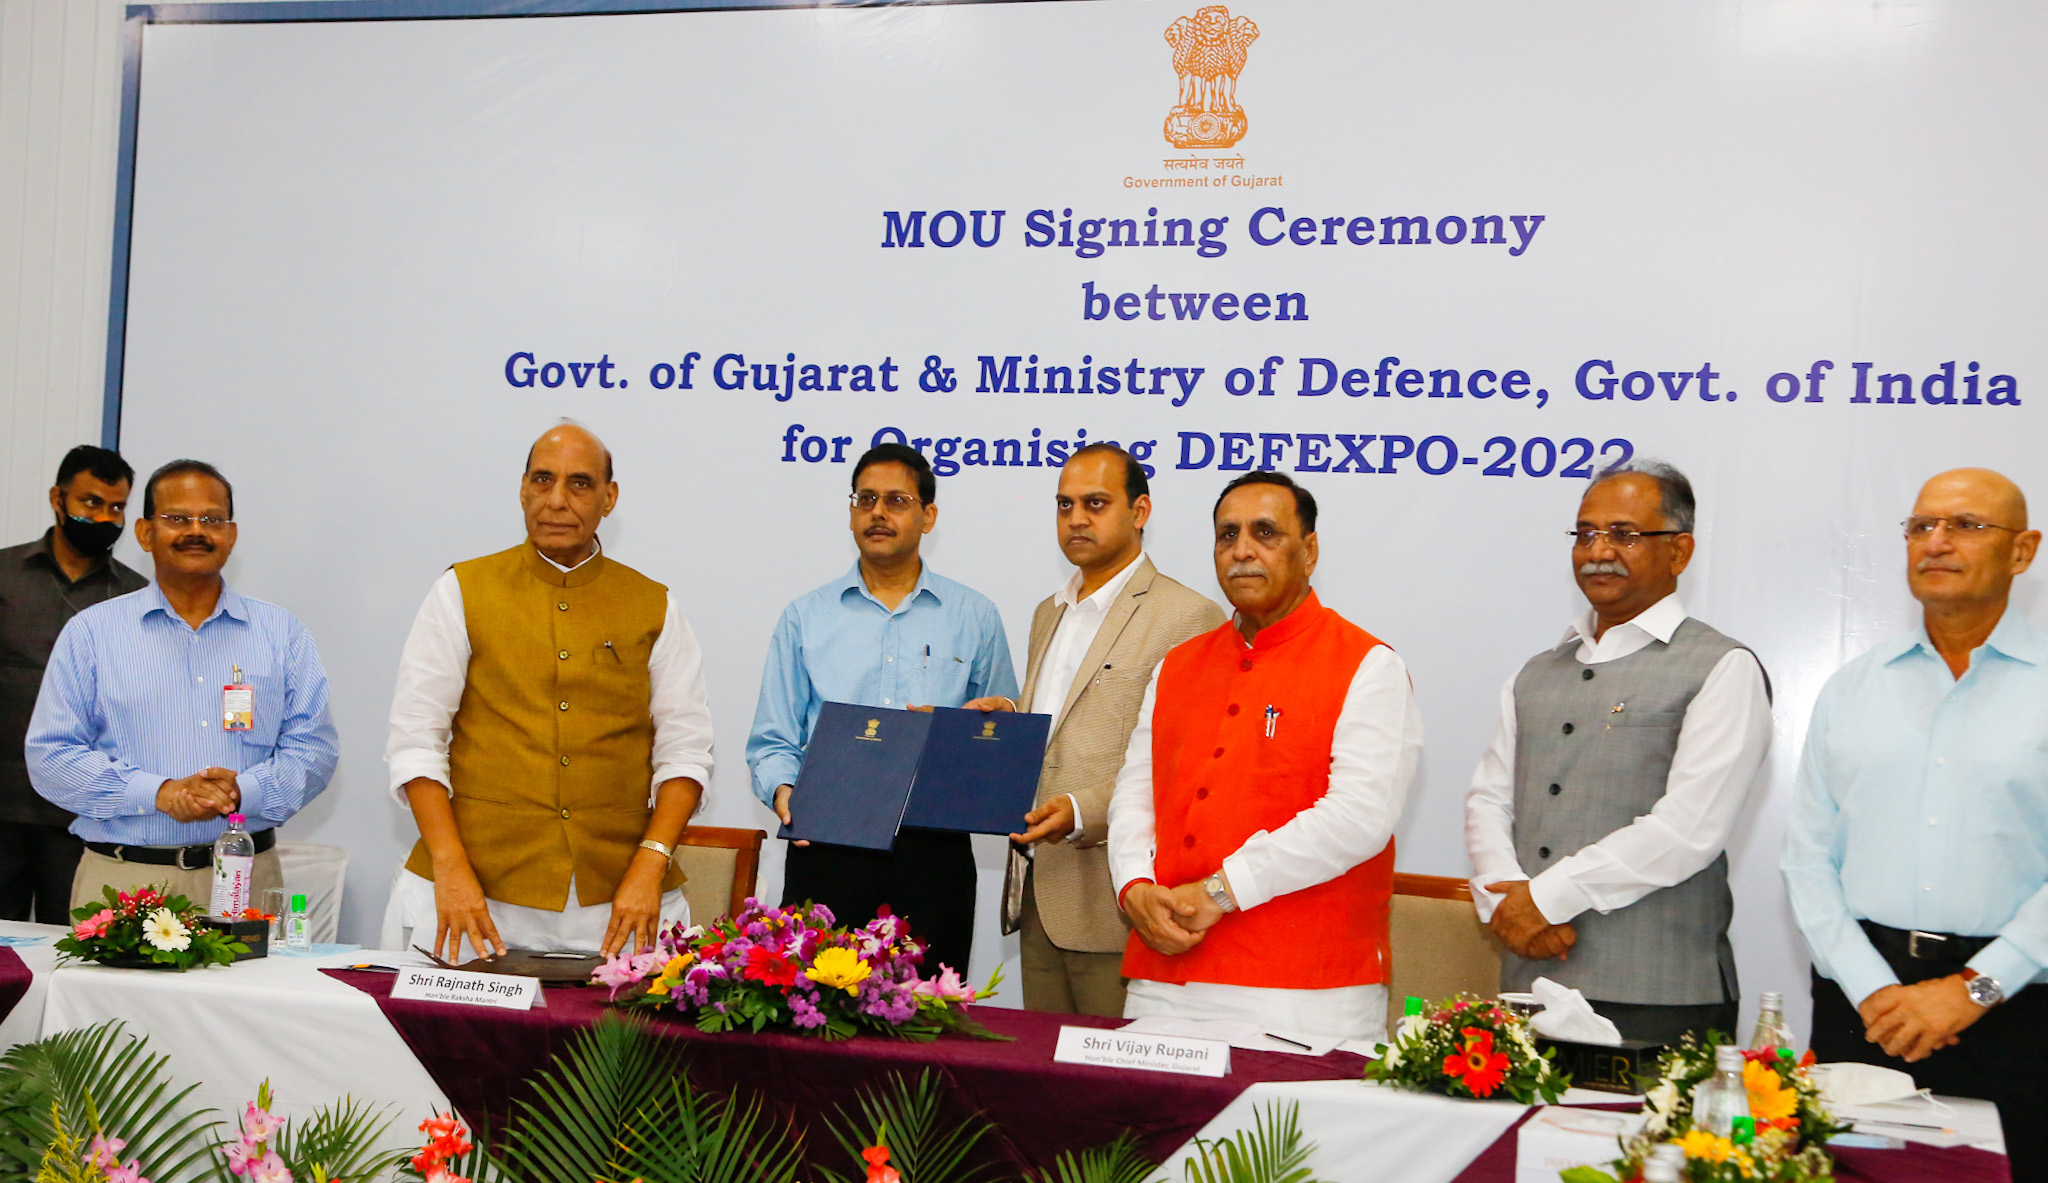 Defence Minister reviews Def Expo-2022 preparations in Gujarat,MOU signed - Aeromag Online